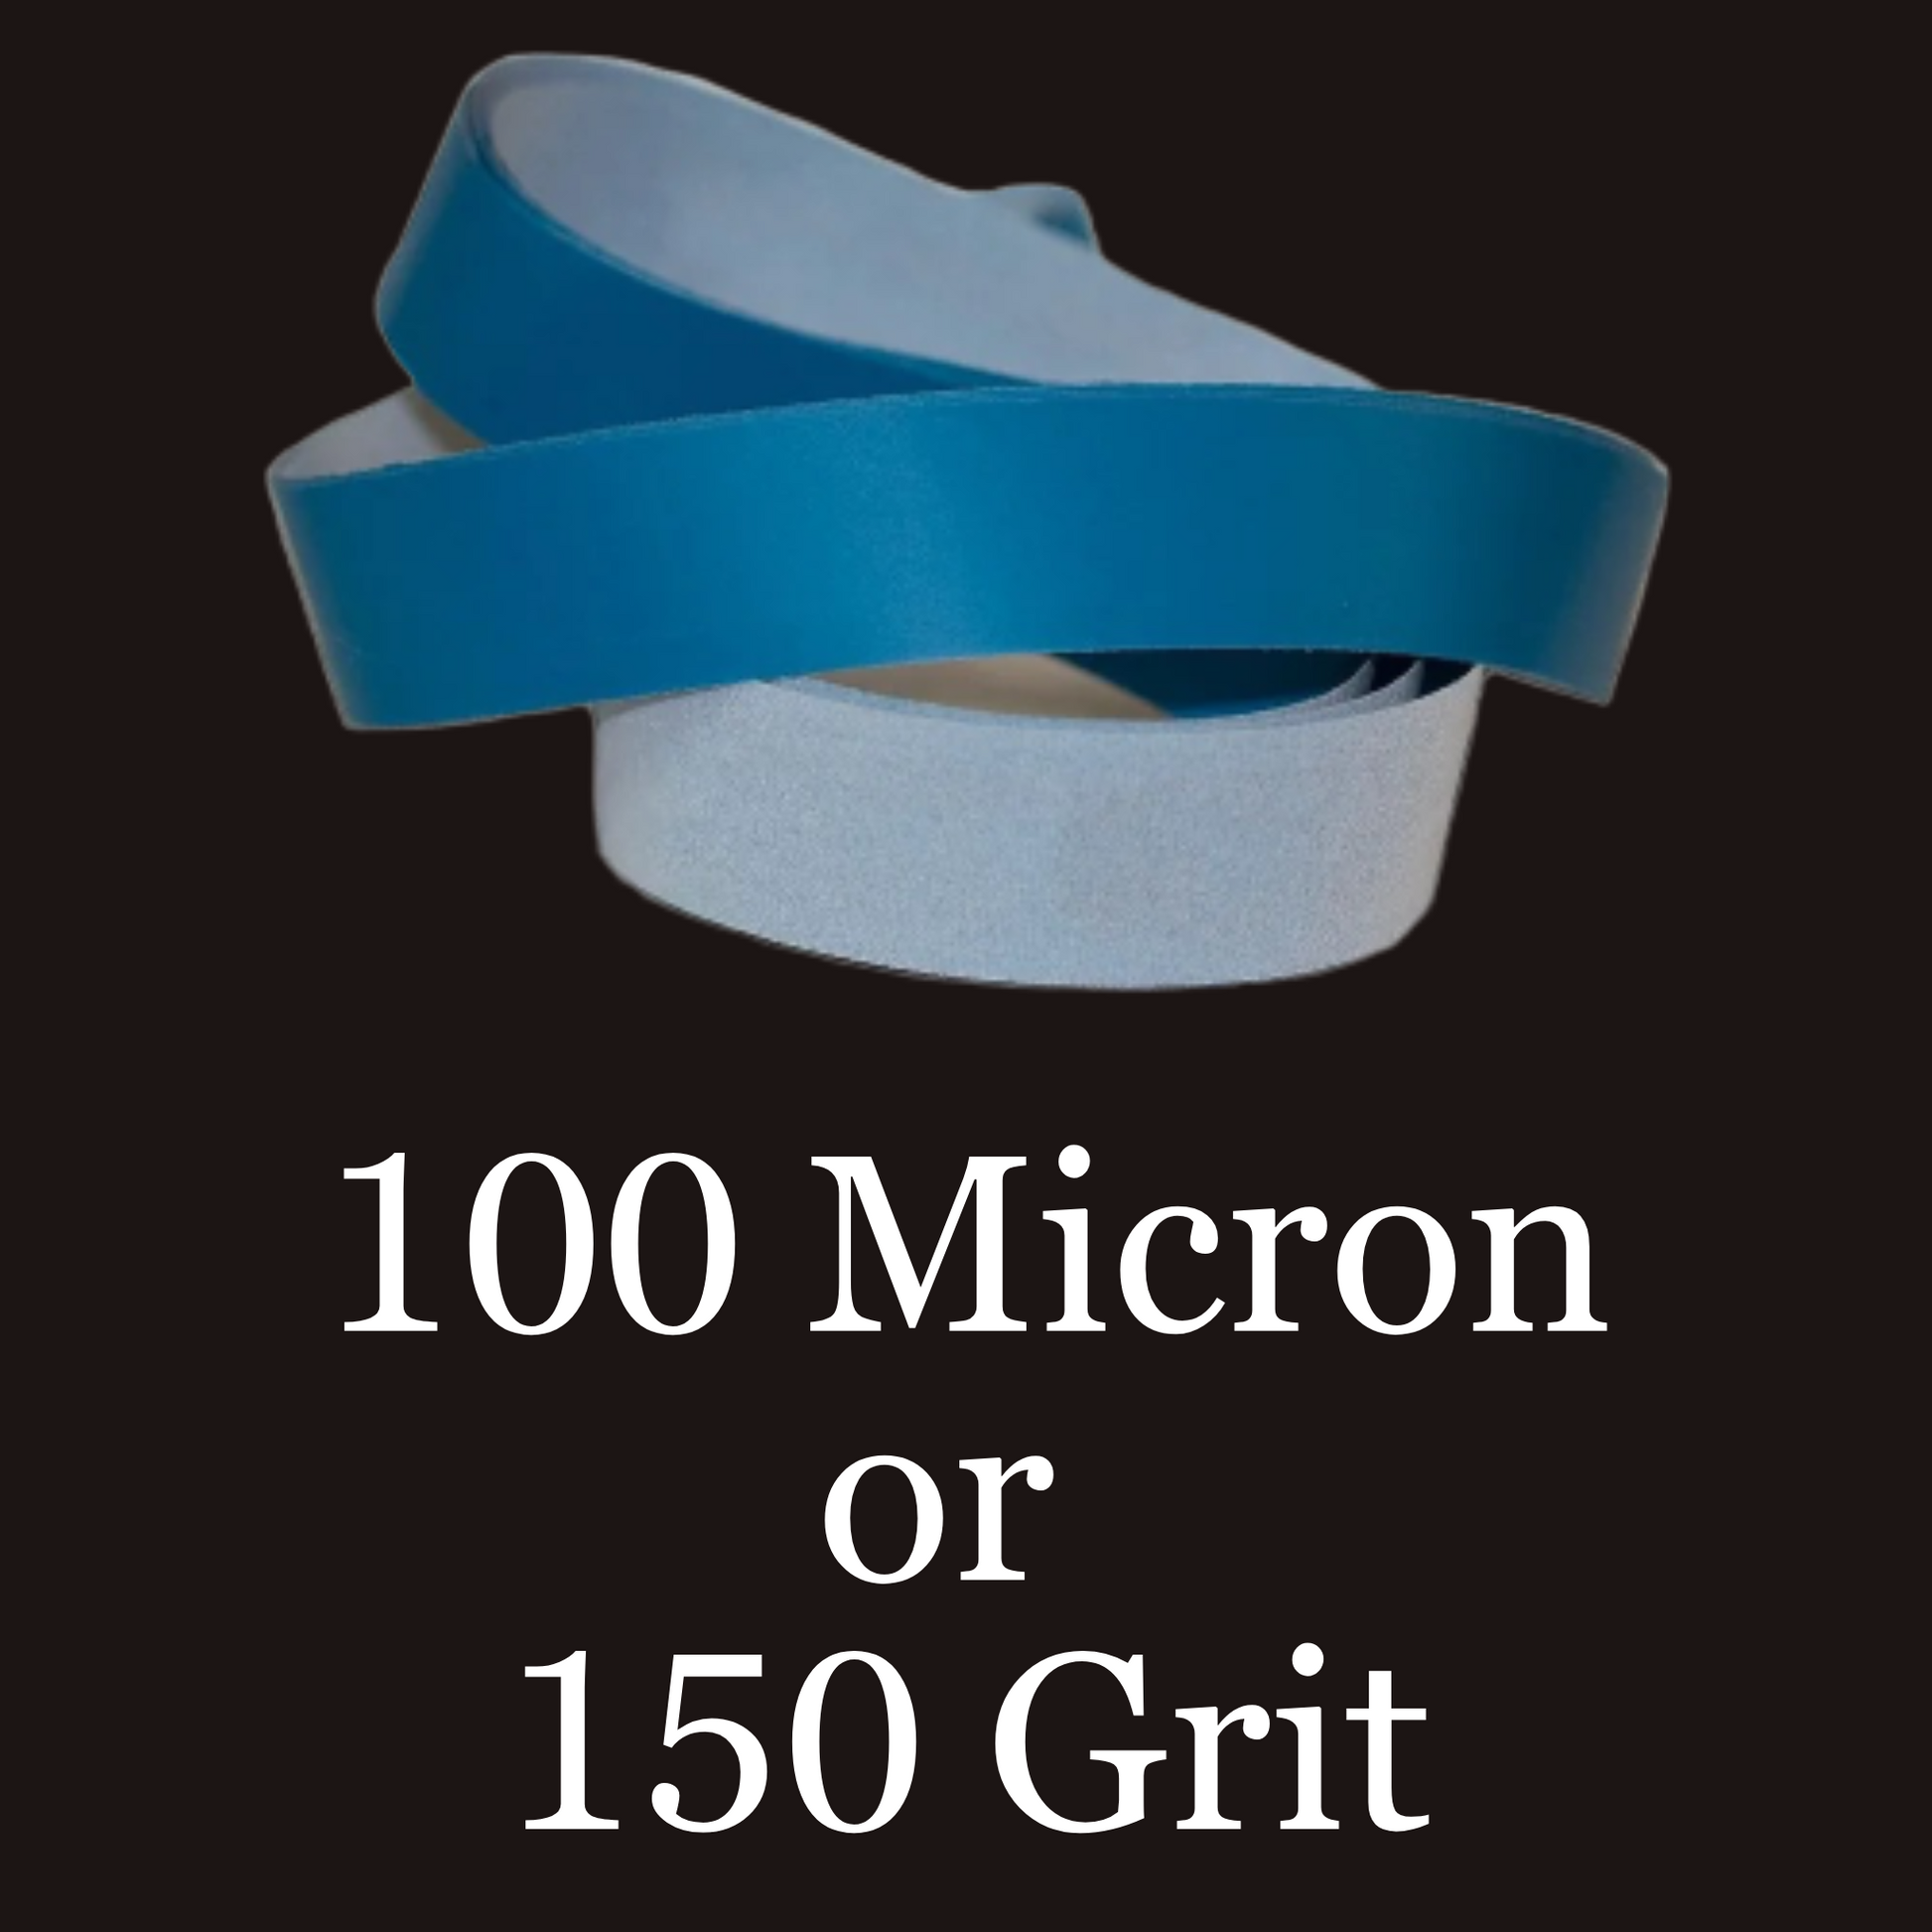 1” x 72” Film Micron Graded Finishing Belts 100 Micron or 150 Grit